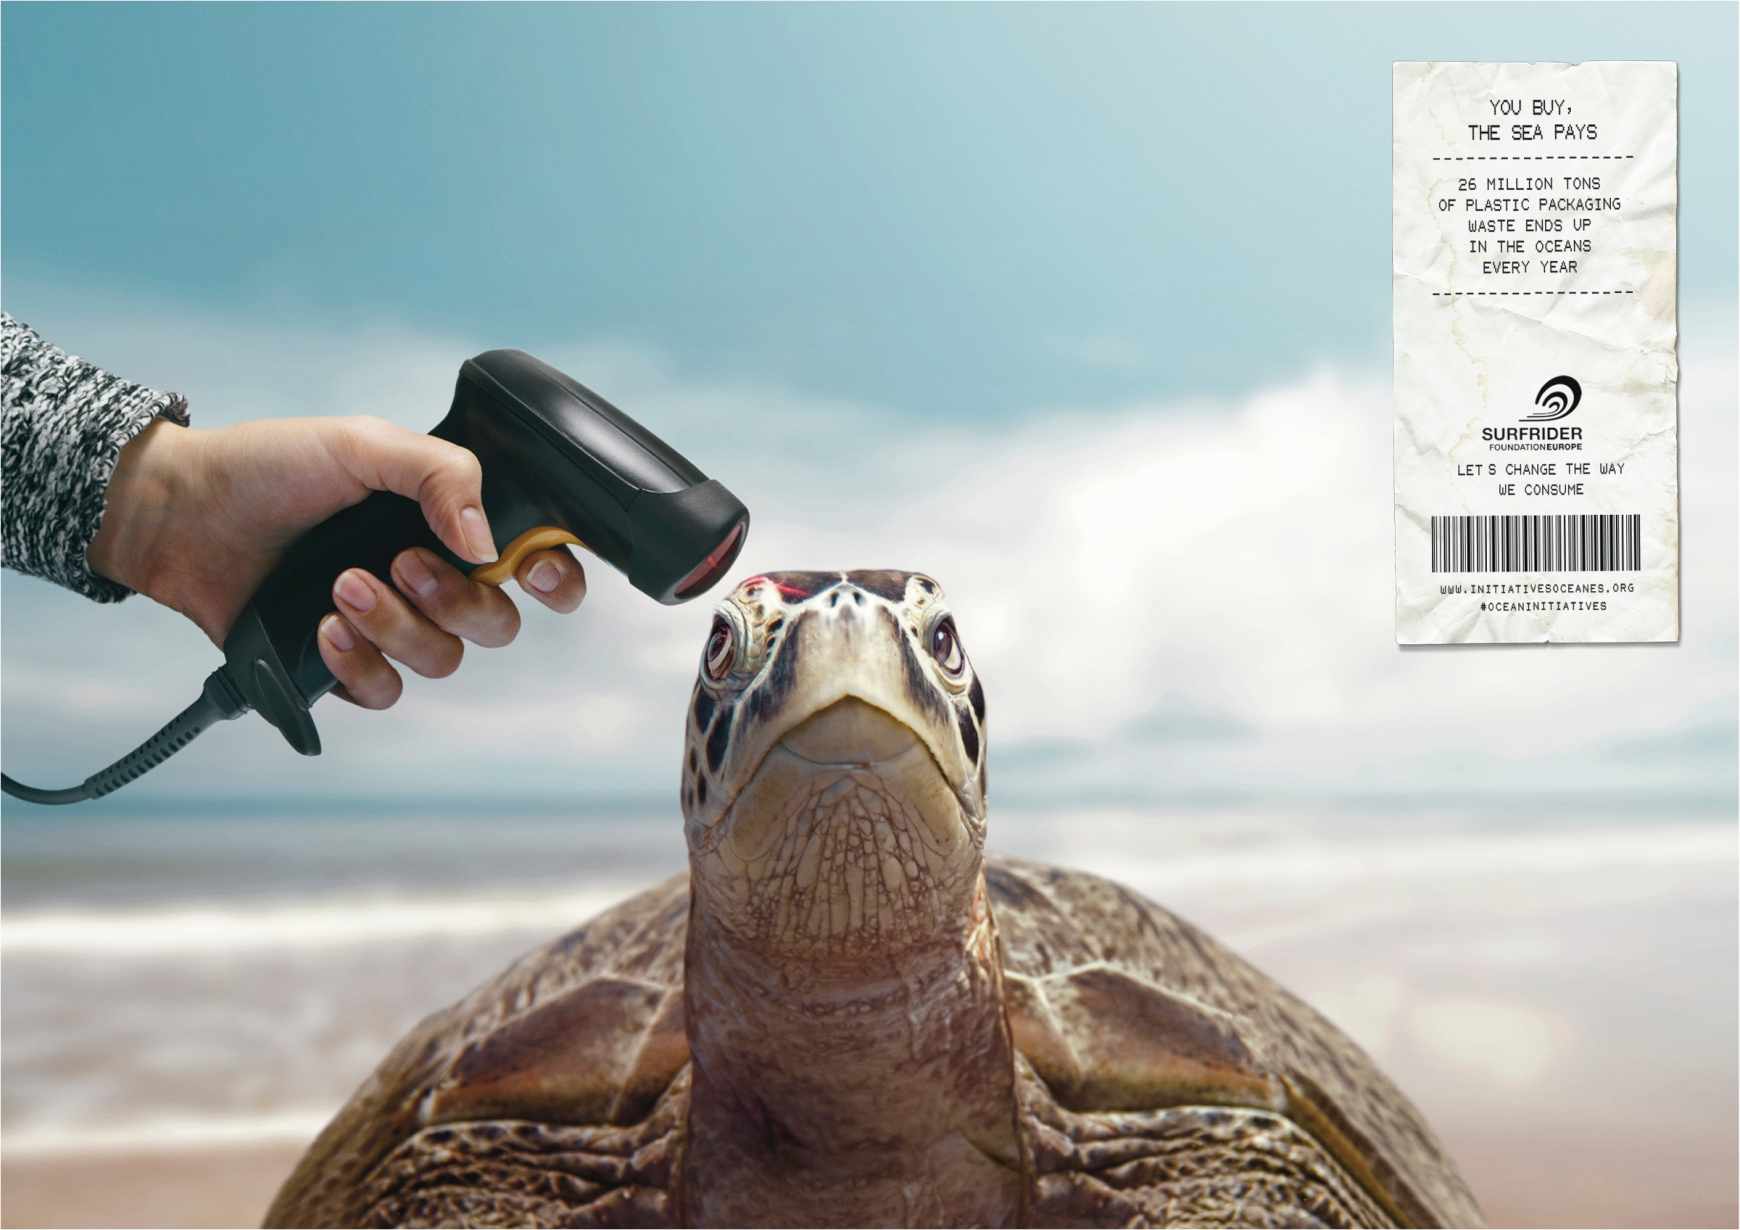 Powerful Ads Featuring Marine Animals at 'Gunpoint' Will Make You Reconsider Your Plastic Use